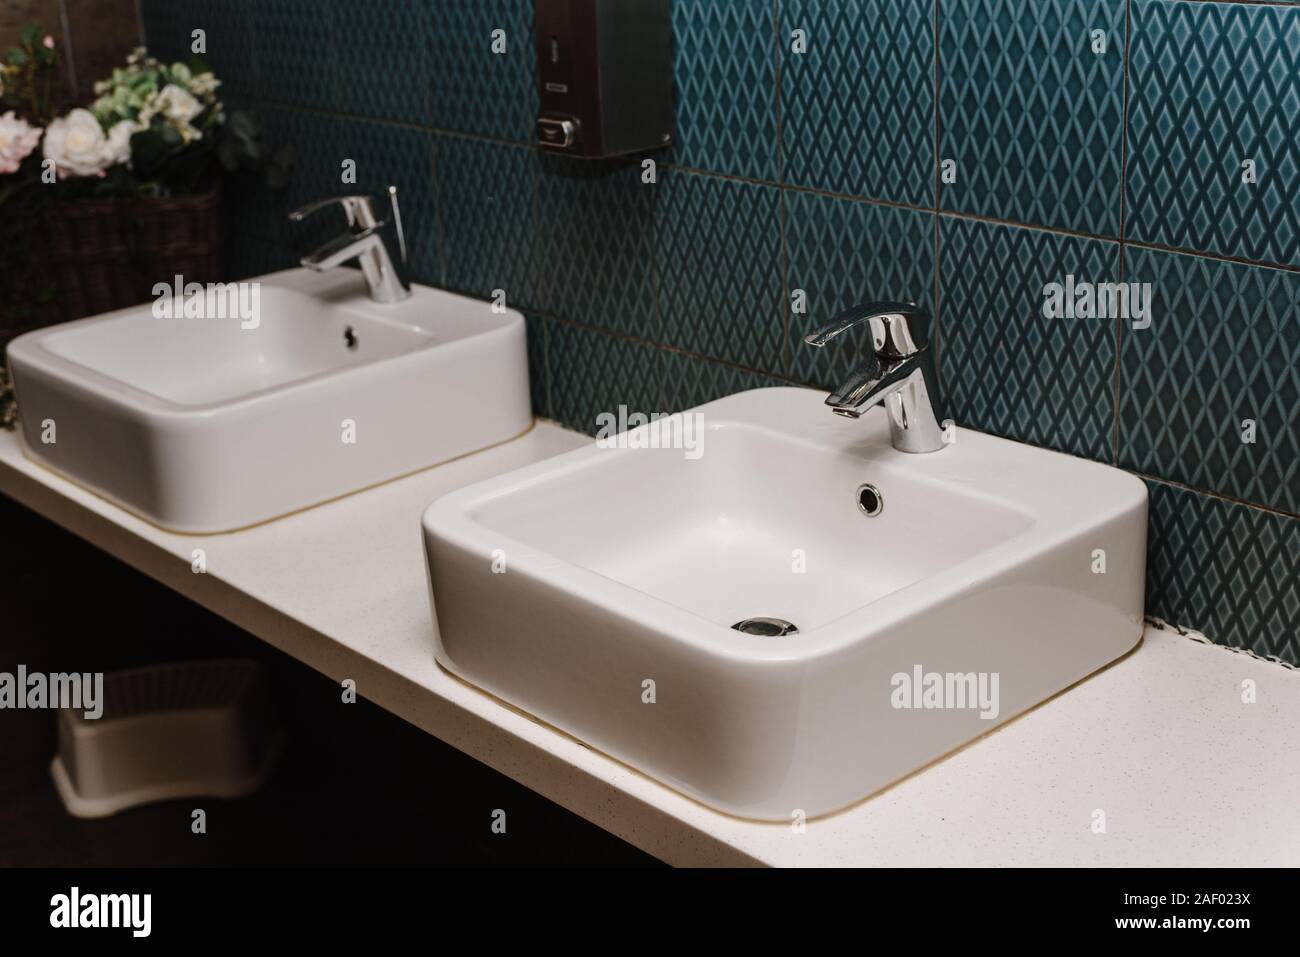 Toilet sink interior of public toilet with of washing hands. Close up. Stock Photo